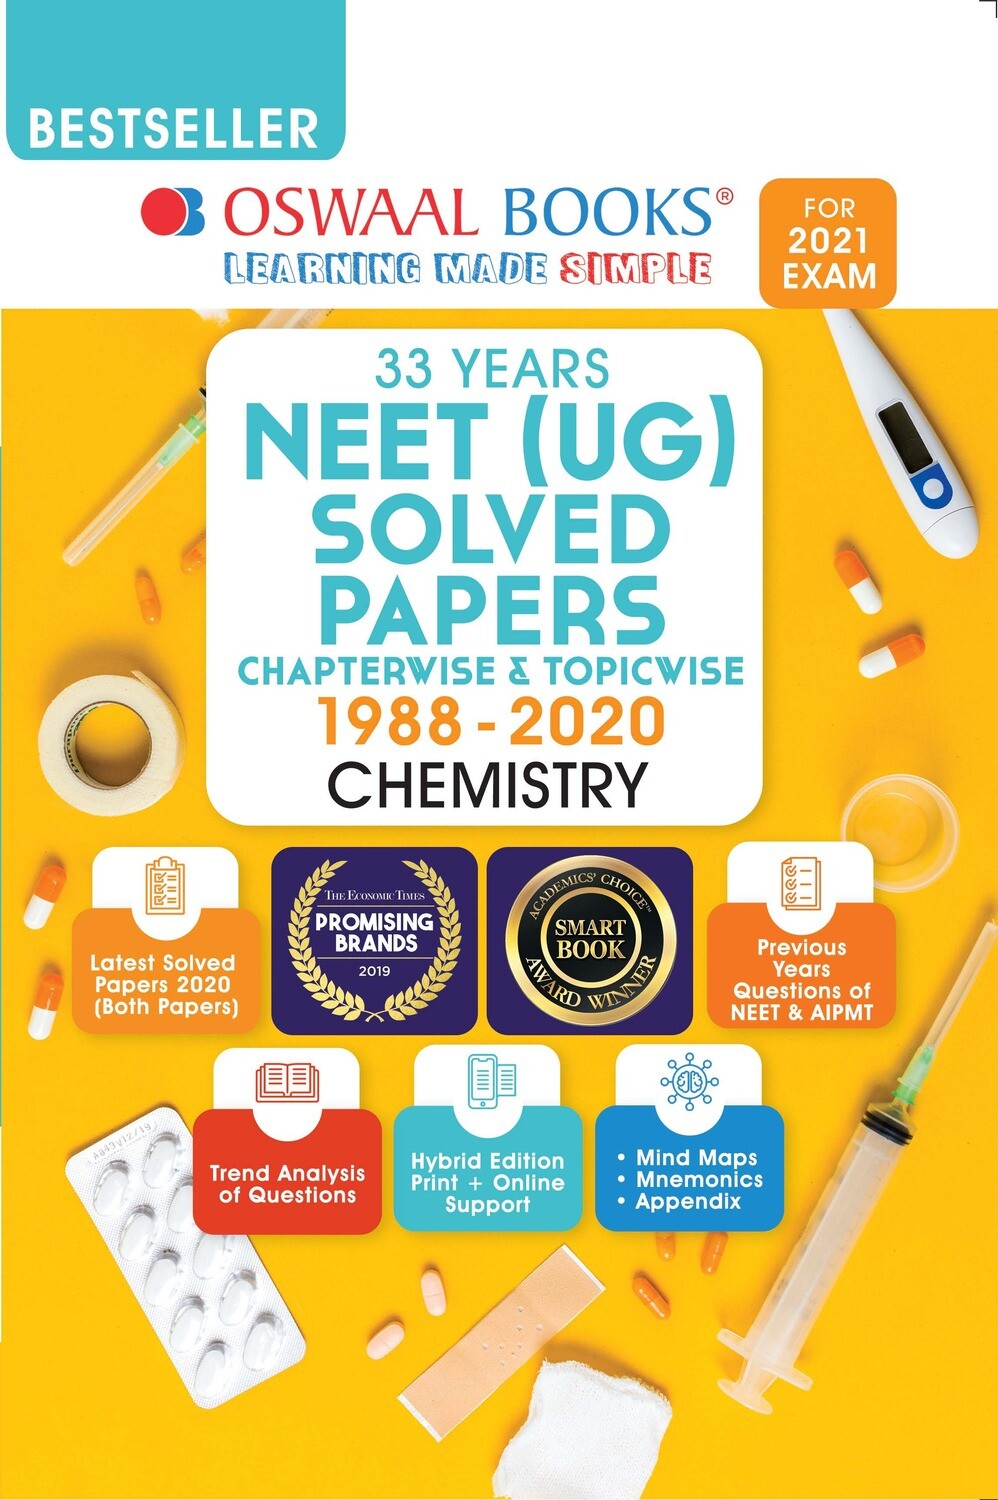 Buy e-book: Oswaal NEET (UG) Solved Papers Chapterwise & Topicwise Chemistry Book (For 2021 Exam)